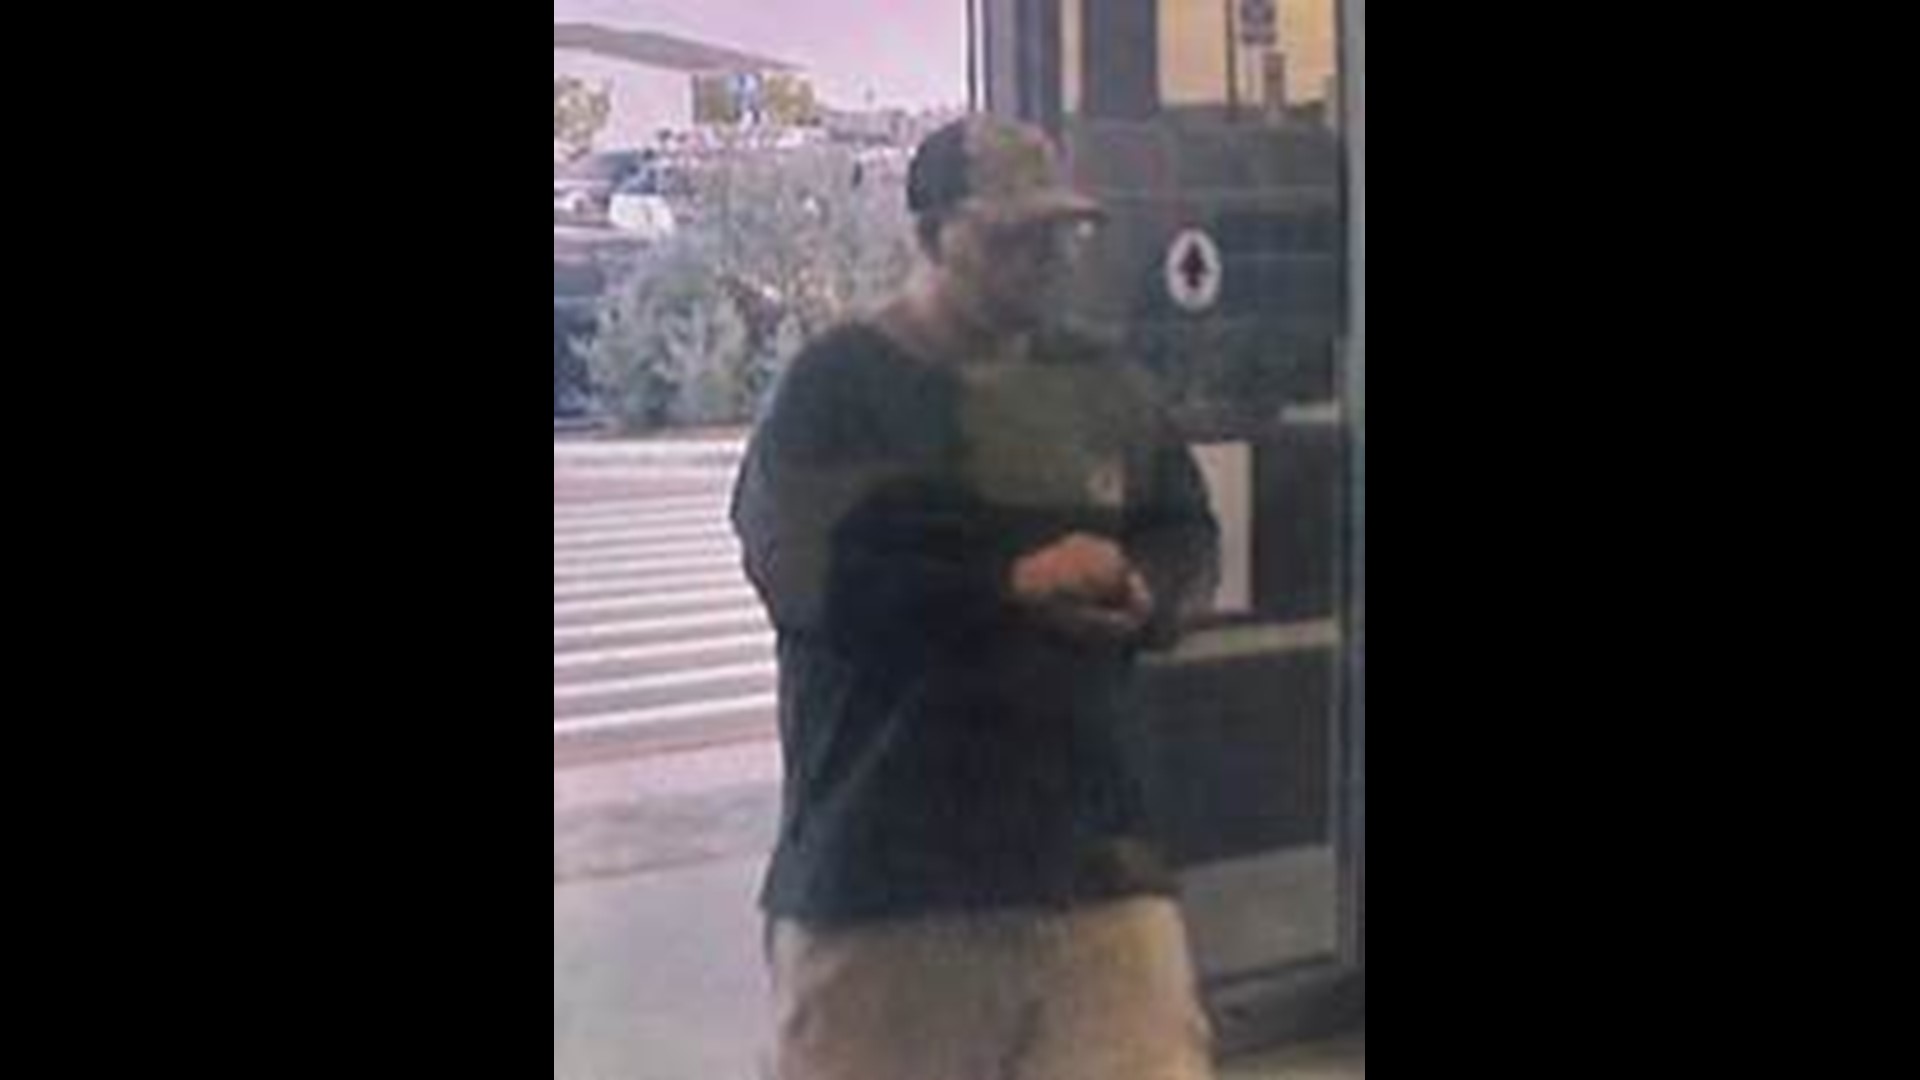 If you recognize this suspect please contact the Hewitt PD or Bellmead PD.